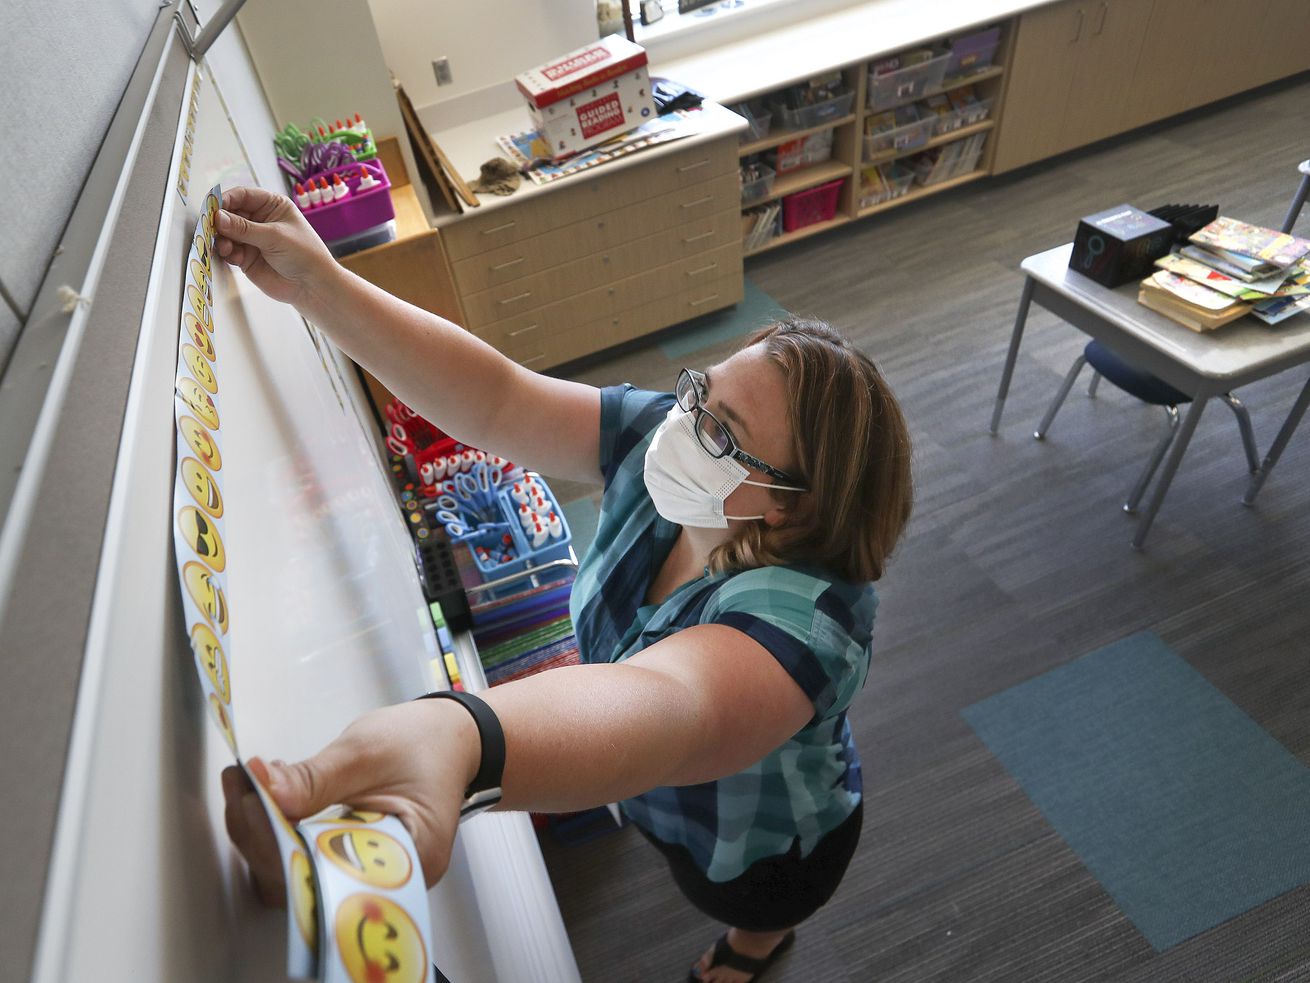 Third grade teacher Tiffany Rudelich puts magnetic smiley face strips on the white board in her classroom at the newly constructed Midvalley Elementary School, 217 E. 7800 South, in Midvale on Monday, Aug. 10, 2020.